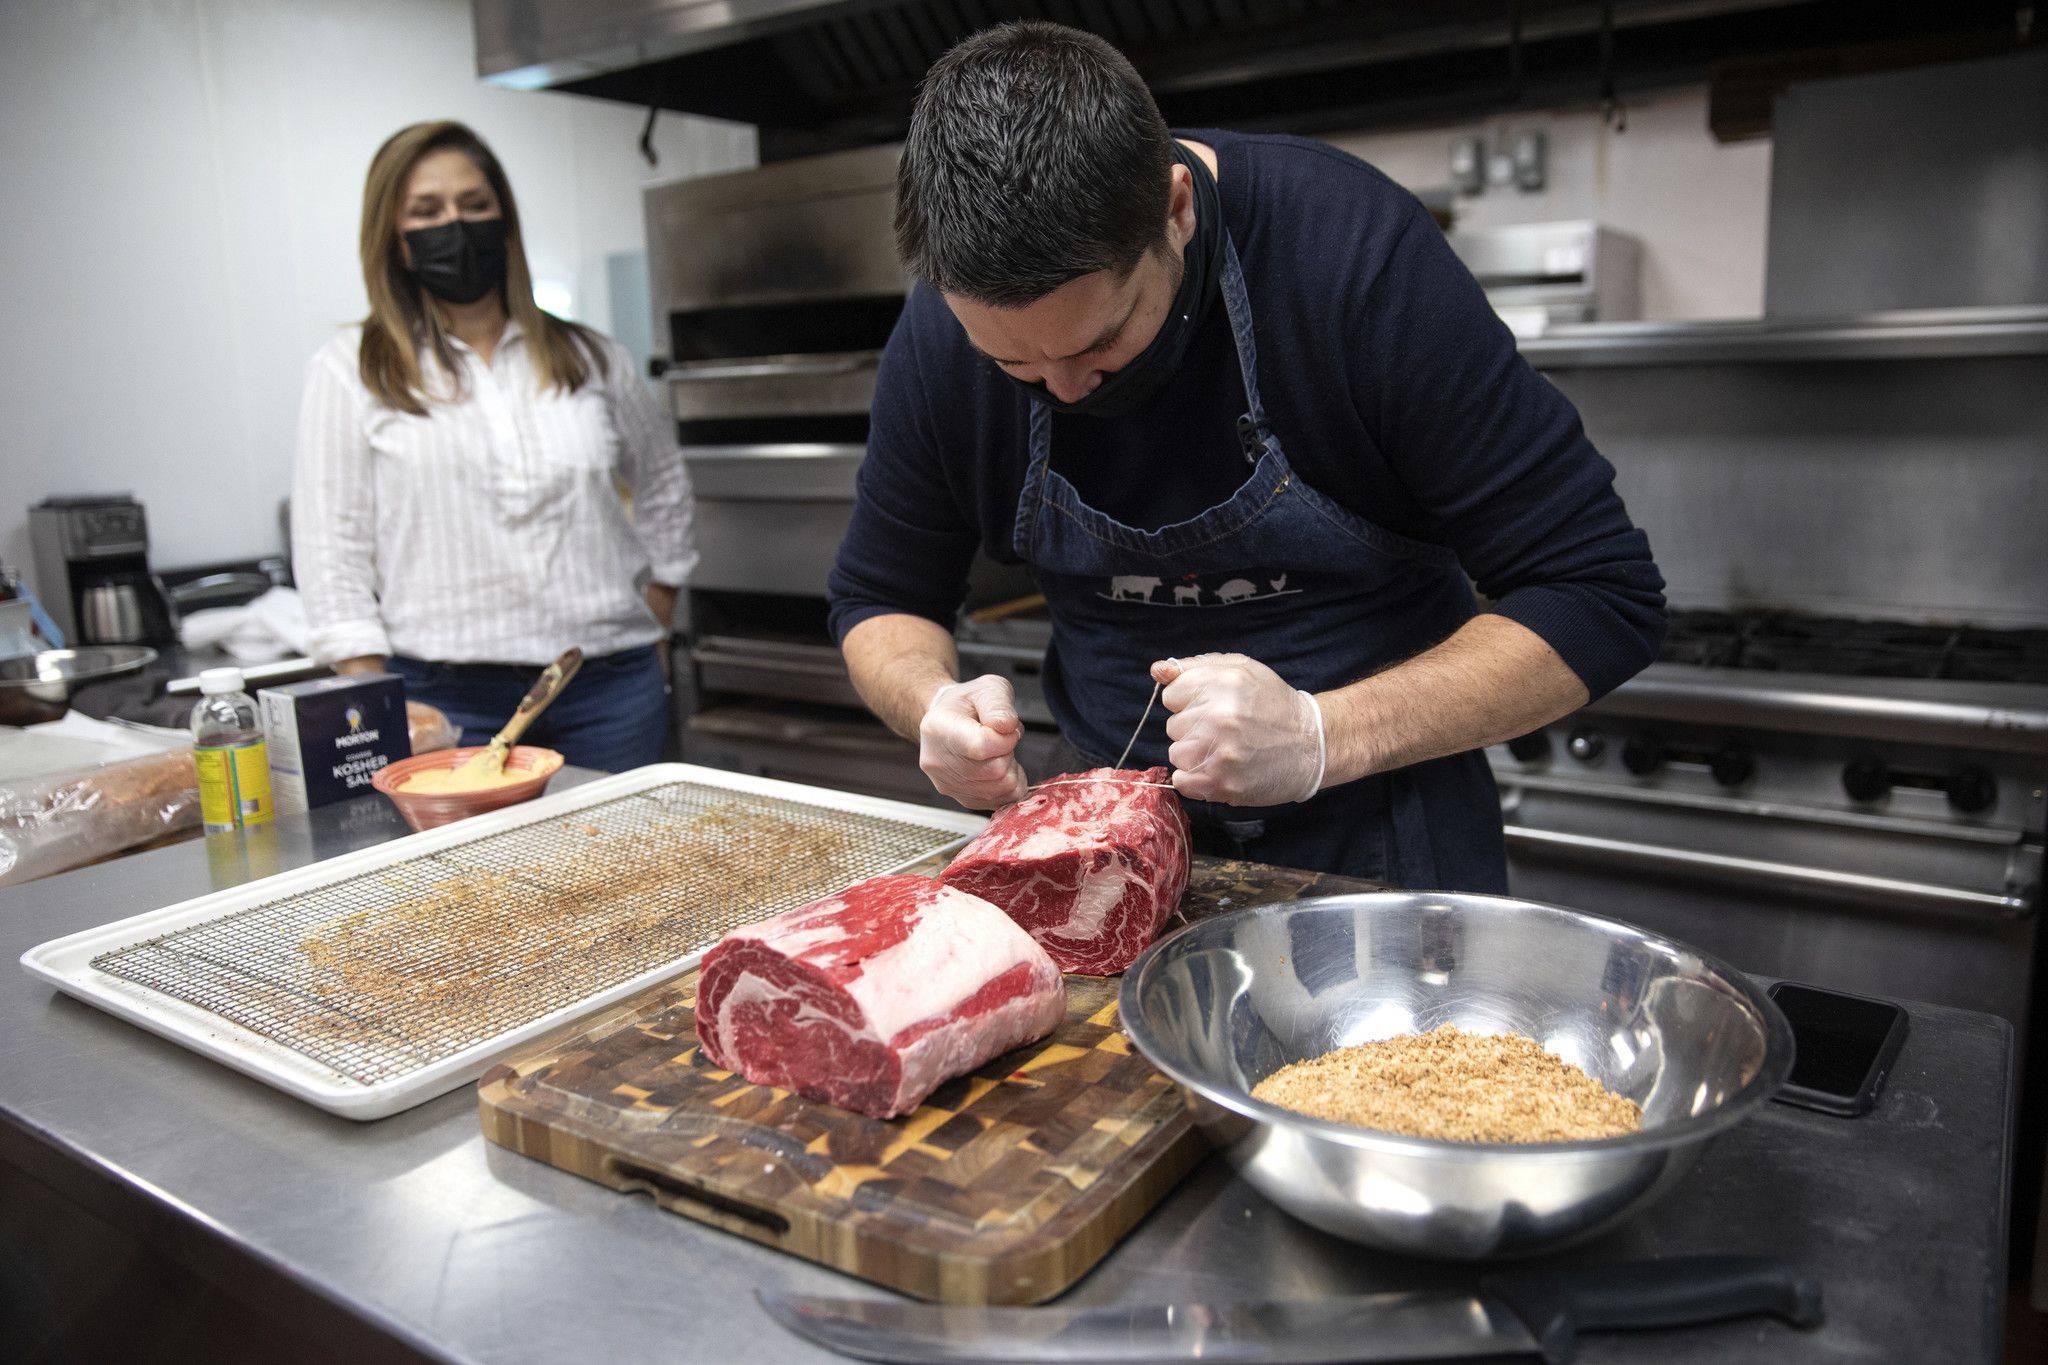 Maribel Moreno-Musillami, founder and owner of Purely Meat Co., watches chef Matt Ronan tie up a Wagyu prime rib cut Dec. 23, 2020, in Chicago. Purely Meat, which distributes meat to high-end restaurants and some grocery stores, saw its business plunge 70% at the start of the pandemic but built a direct-to-consumer website. (Erin Hooley/Chicago Tribune)